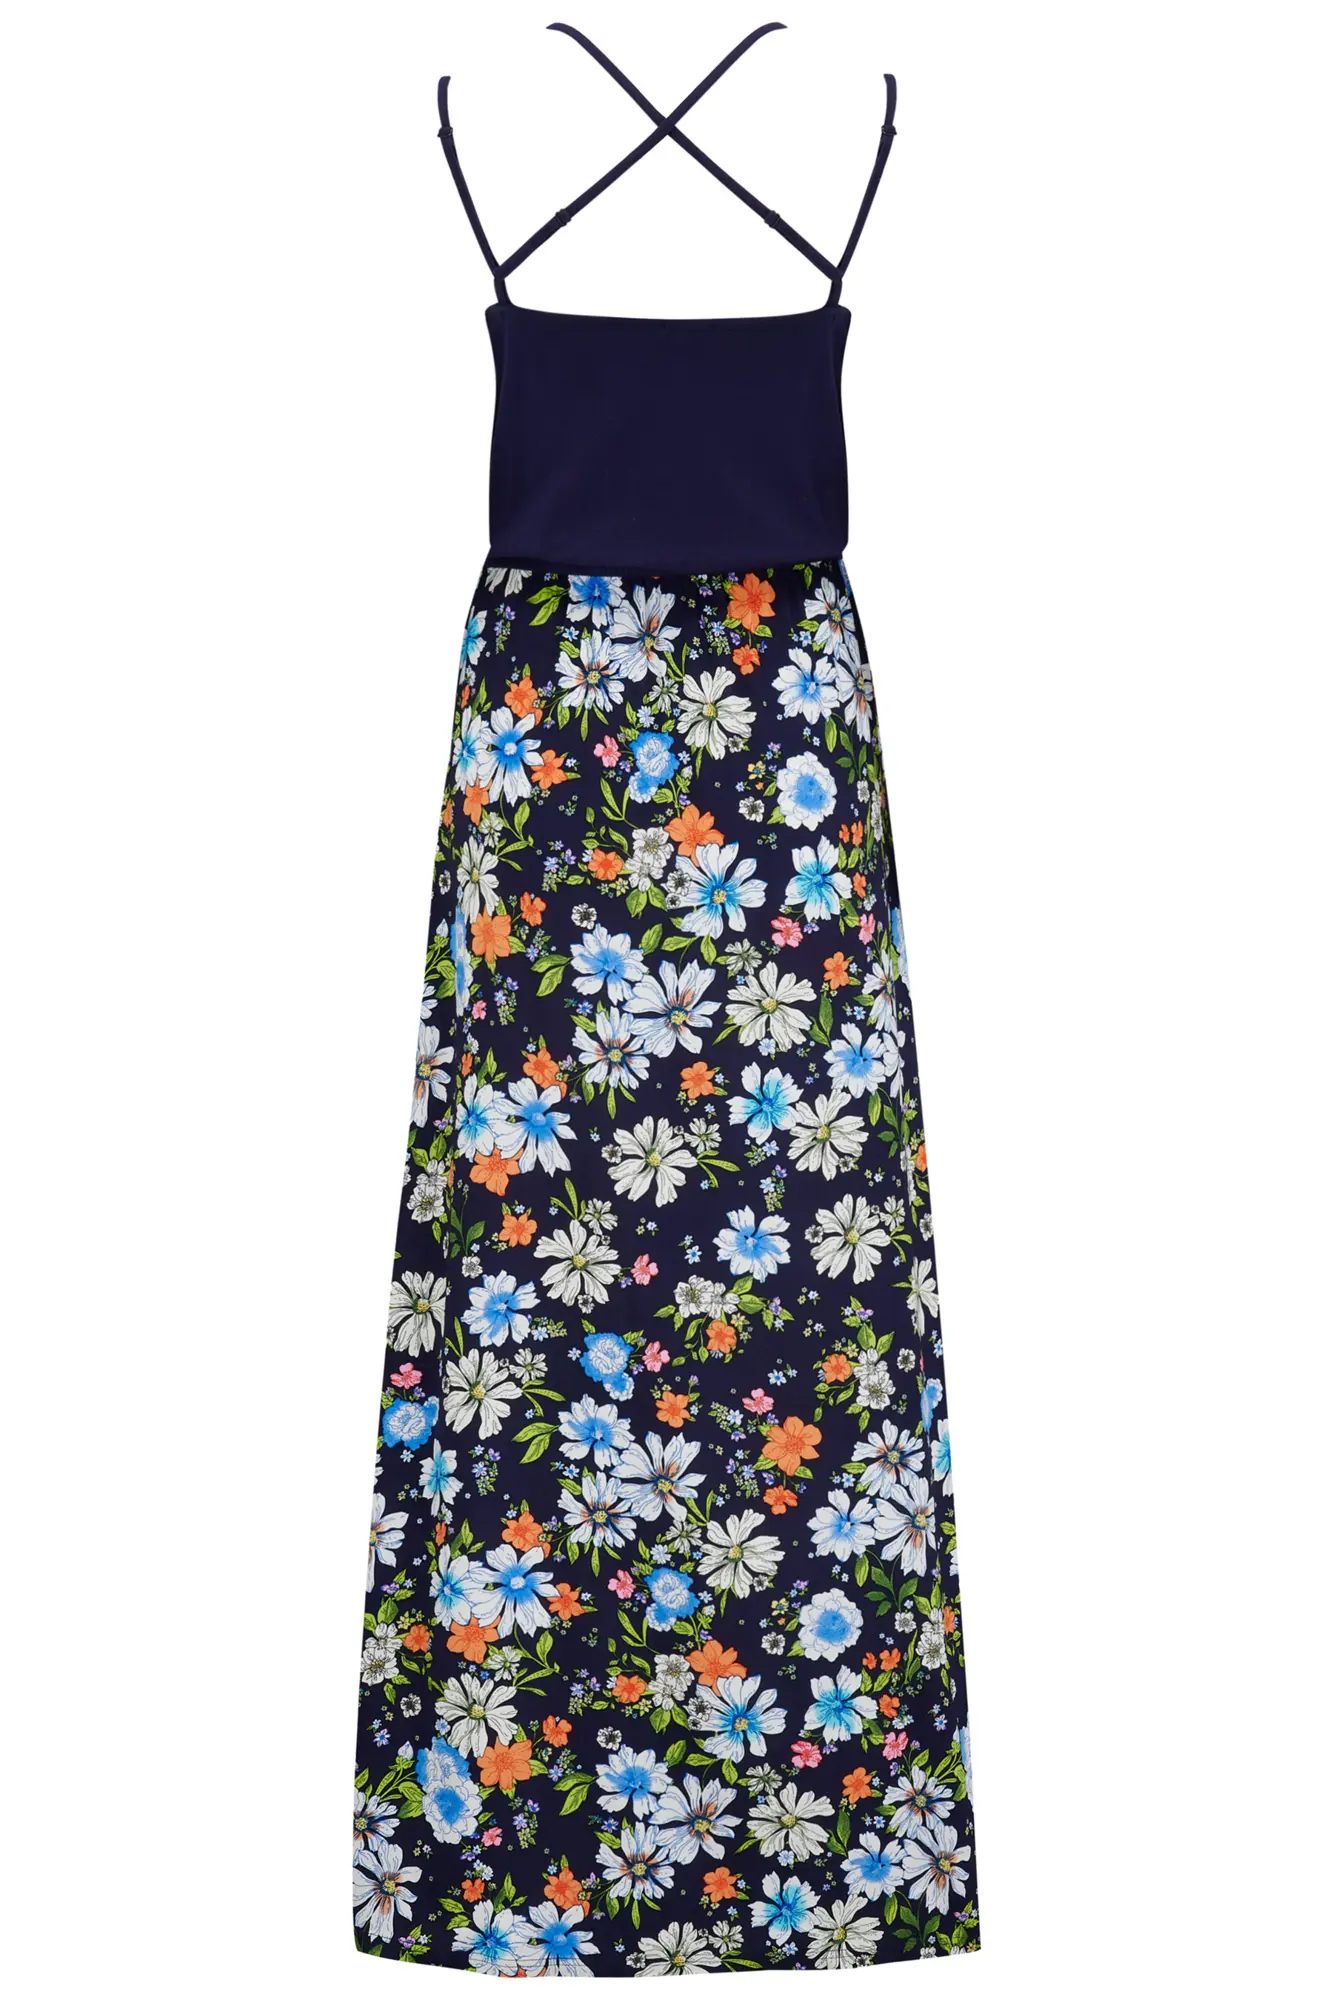 Cross Back Strappy Jersey Woven Mix Maxi Dress | Navy/Blue Floral ...